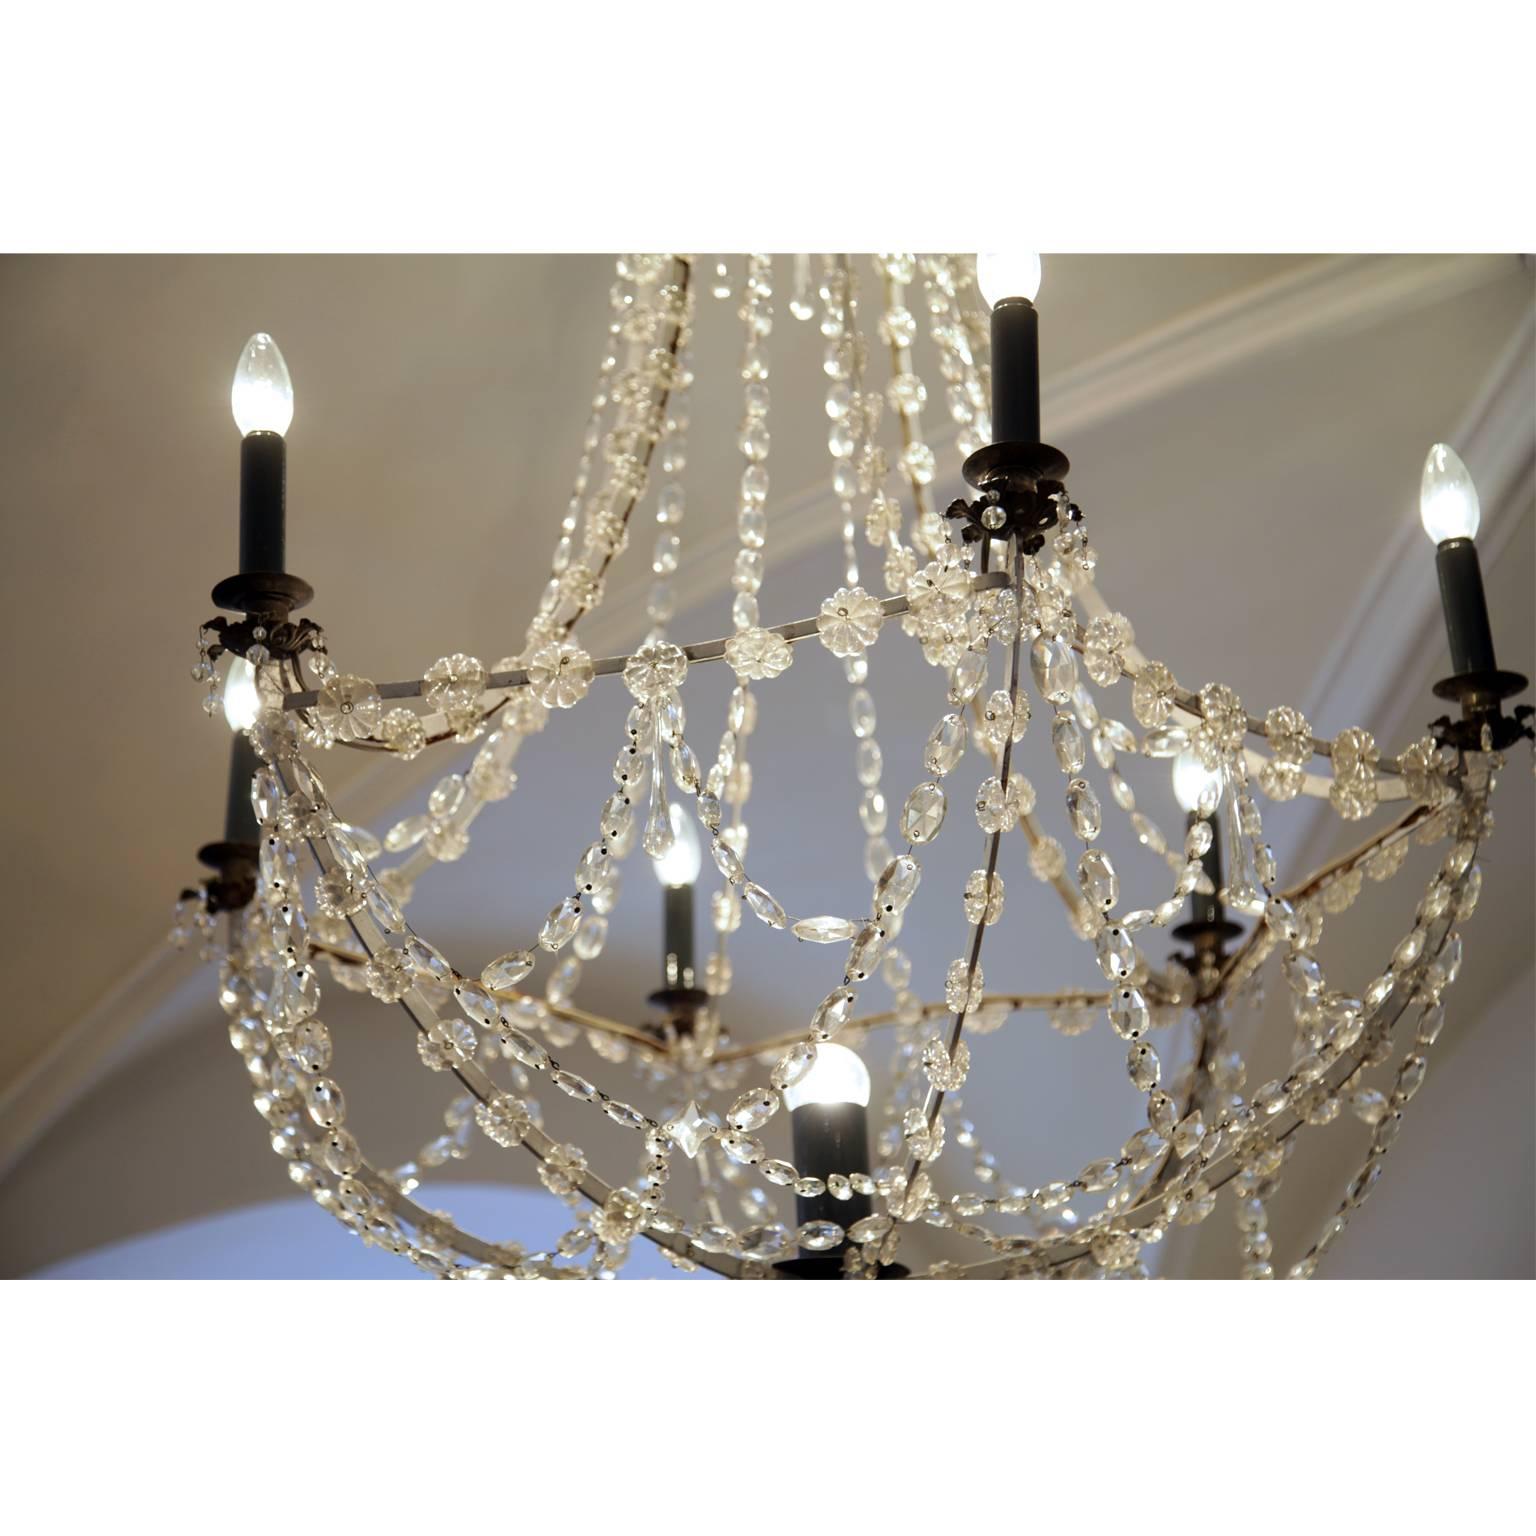 European Seven-Light Chandelier, First Half of the 19th Century For Sale